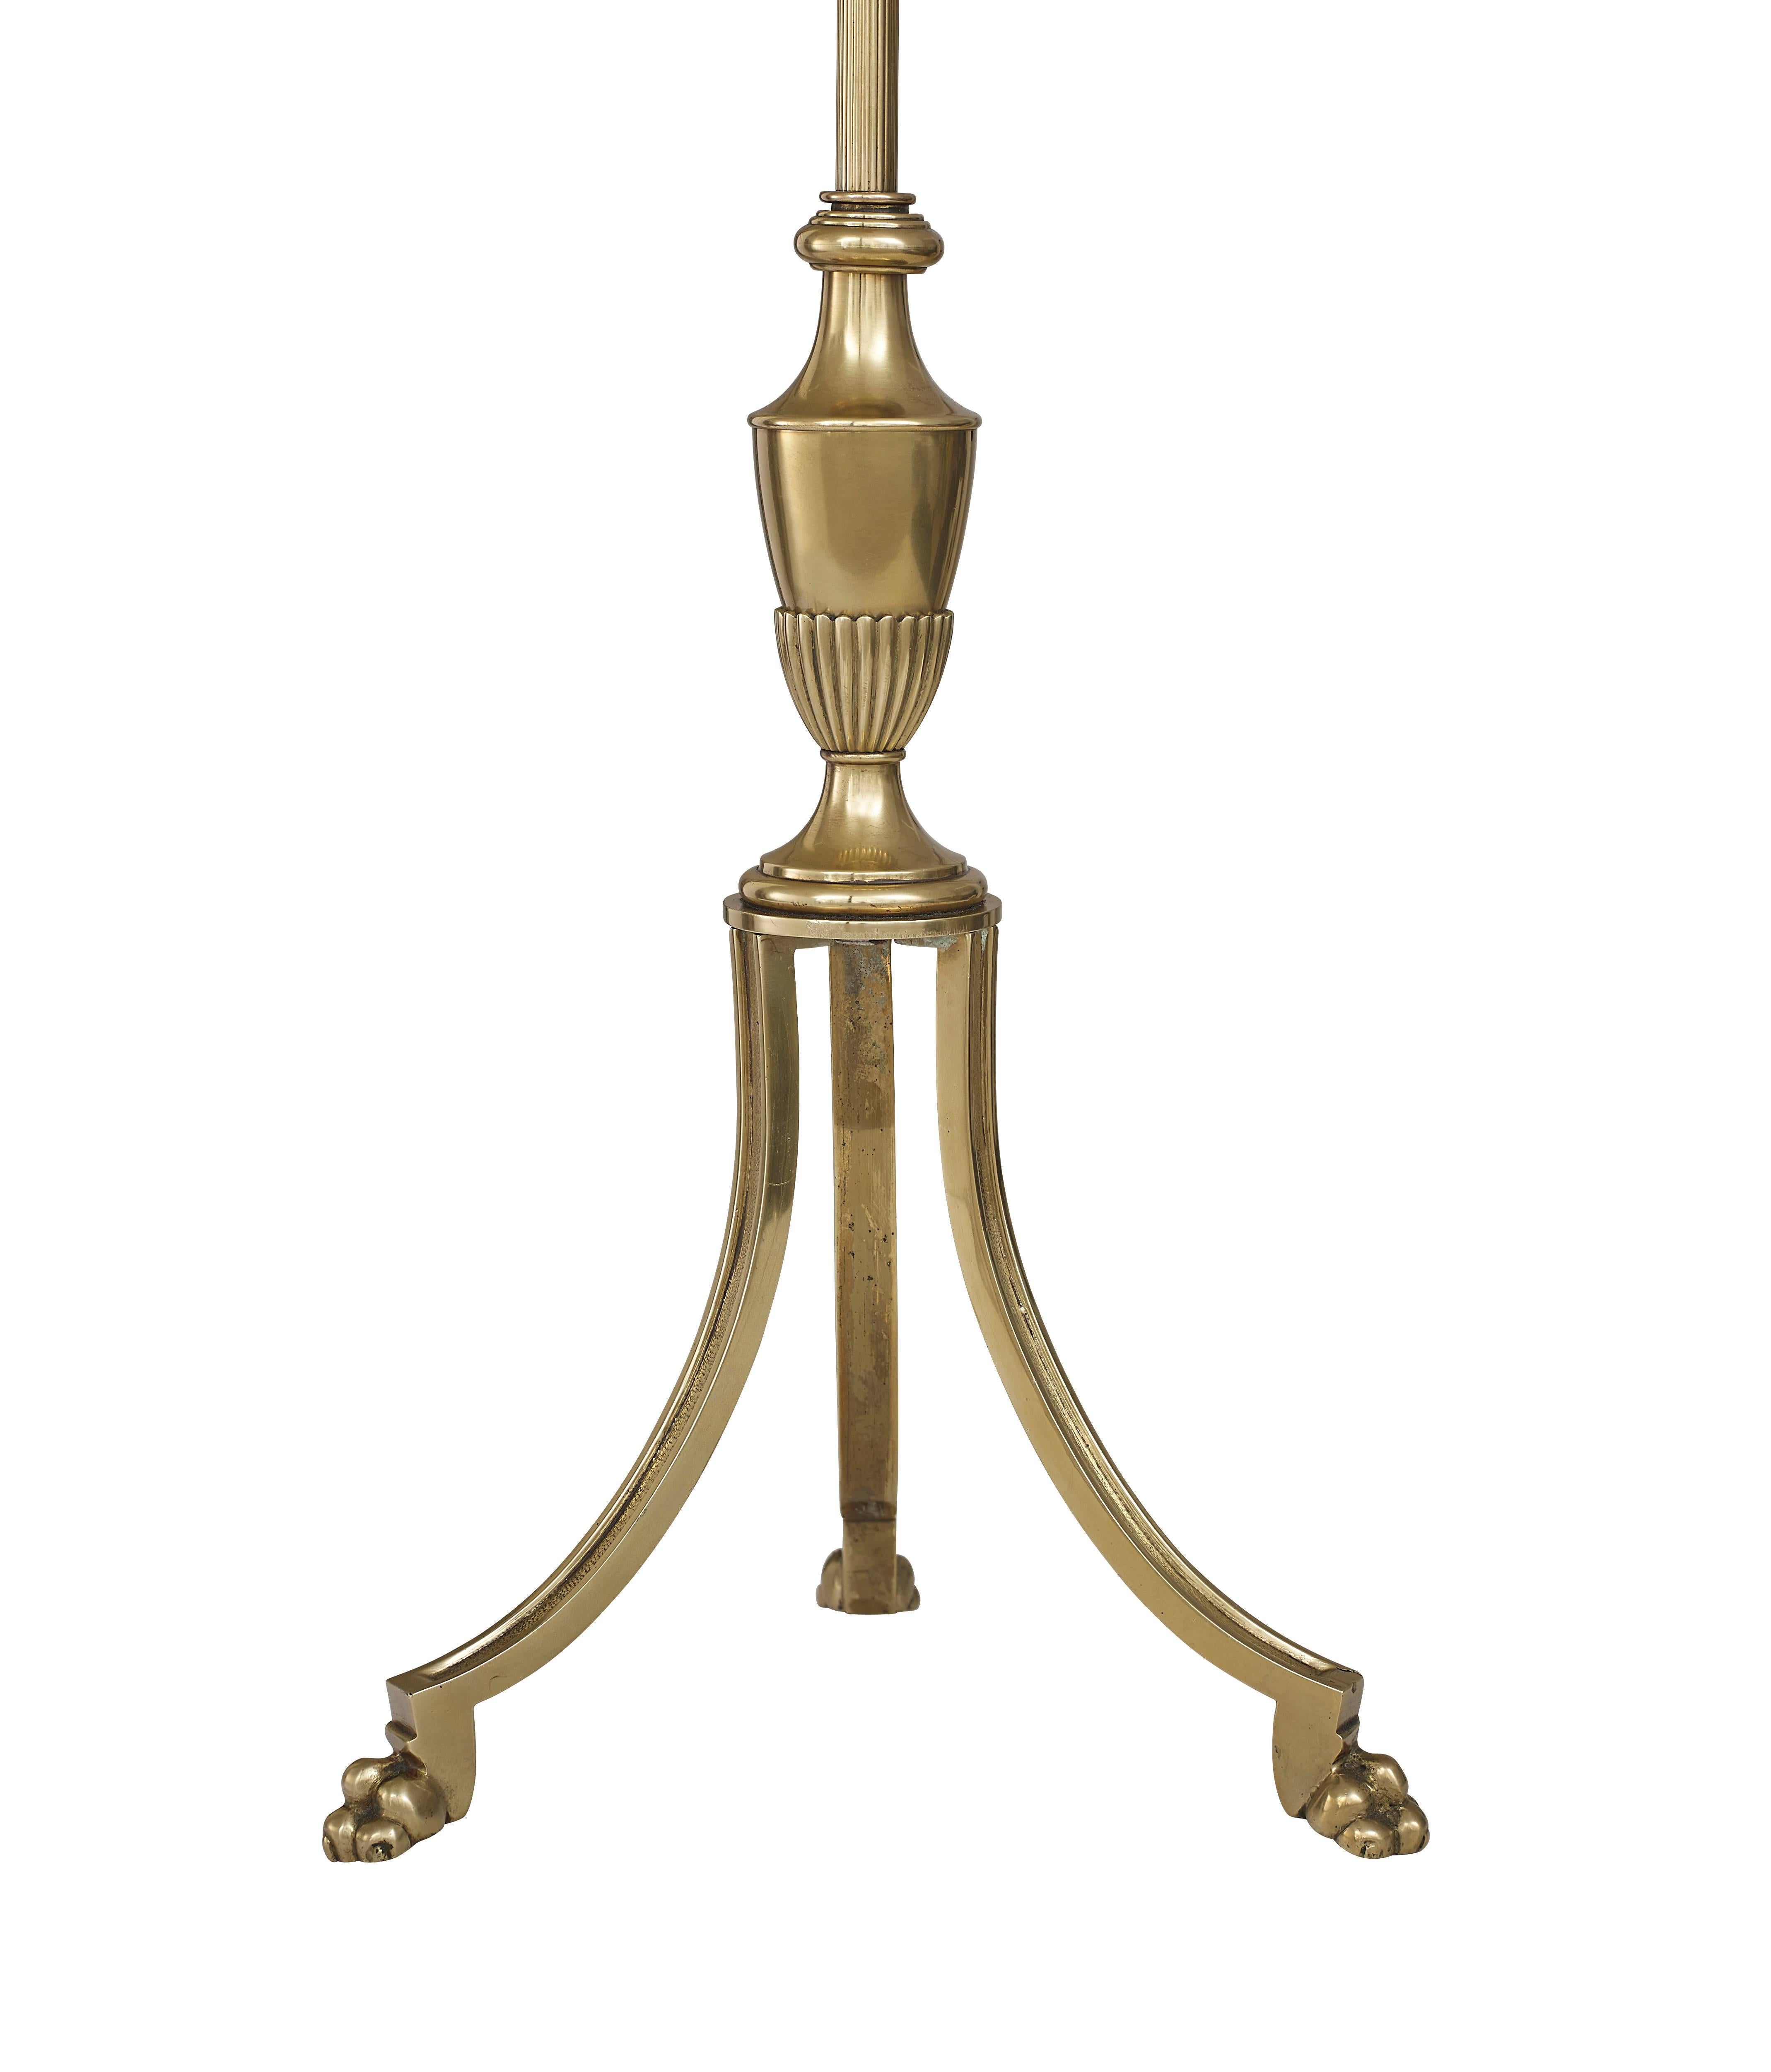 A beautiful Maison Jansen floor lamp with a claw feet base and stunning above. A brass column leading to a large waxed candelabra attached to a three bulb fitting, which are all adjustable.

A handmade french black and lined gold lampshade is